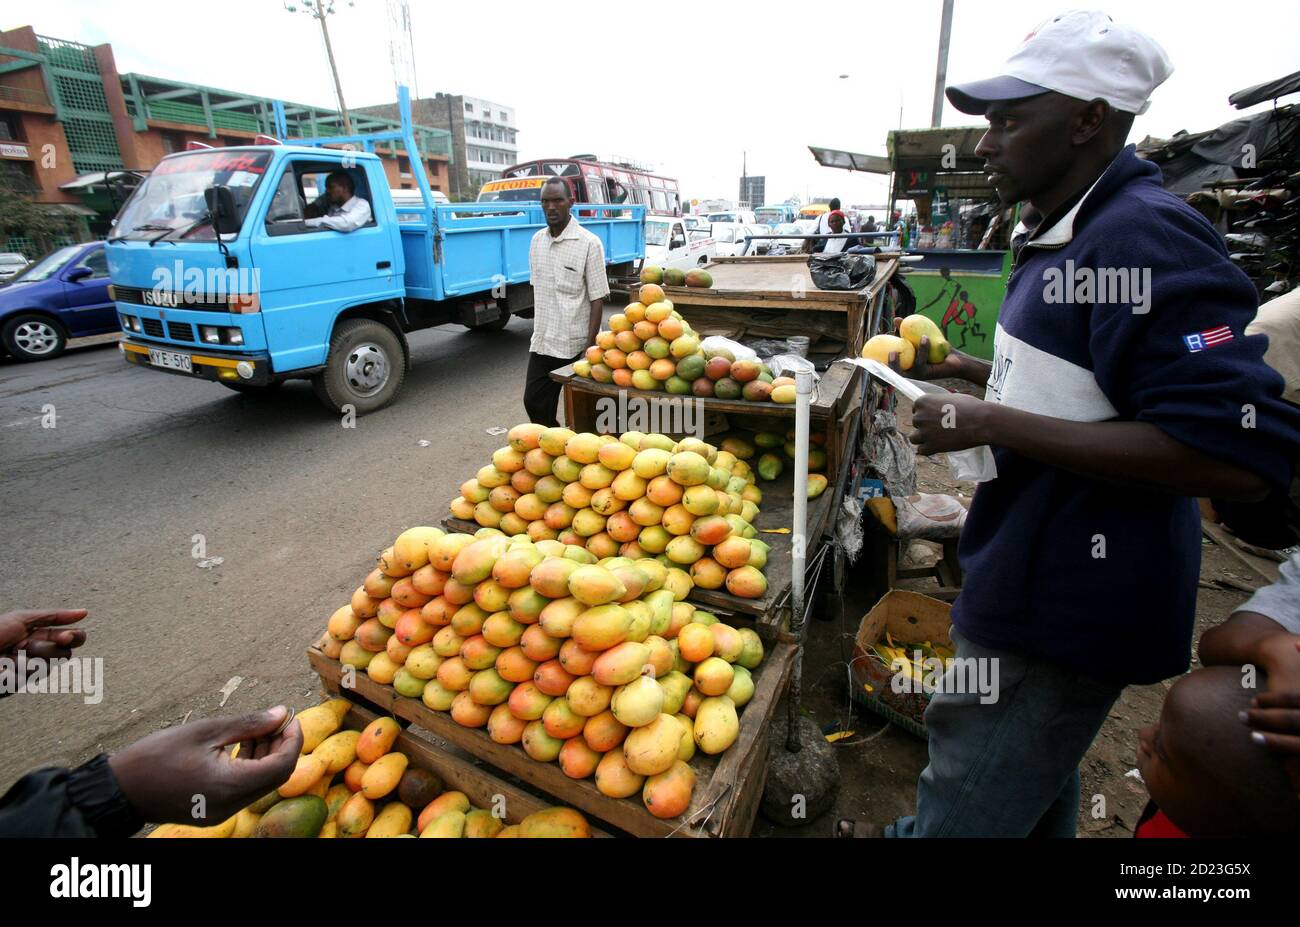 A trader sells mangoes next to moving traffic in Kenya's capital Nairobi, April 3, 2009. The global economic slump makes it even more important for African governments to help local businesses by cutting red tape in areas like customs, tax and registration, a continental investment body said on Friday. REUTERS/Thomas Mukoya (KENYA BUSINESS POLITICS) Stock Photo